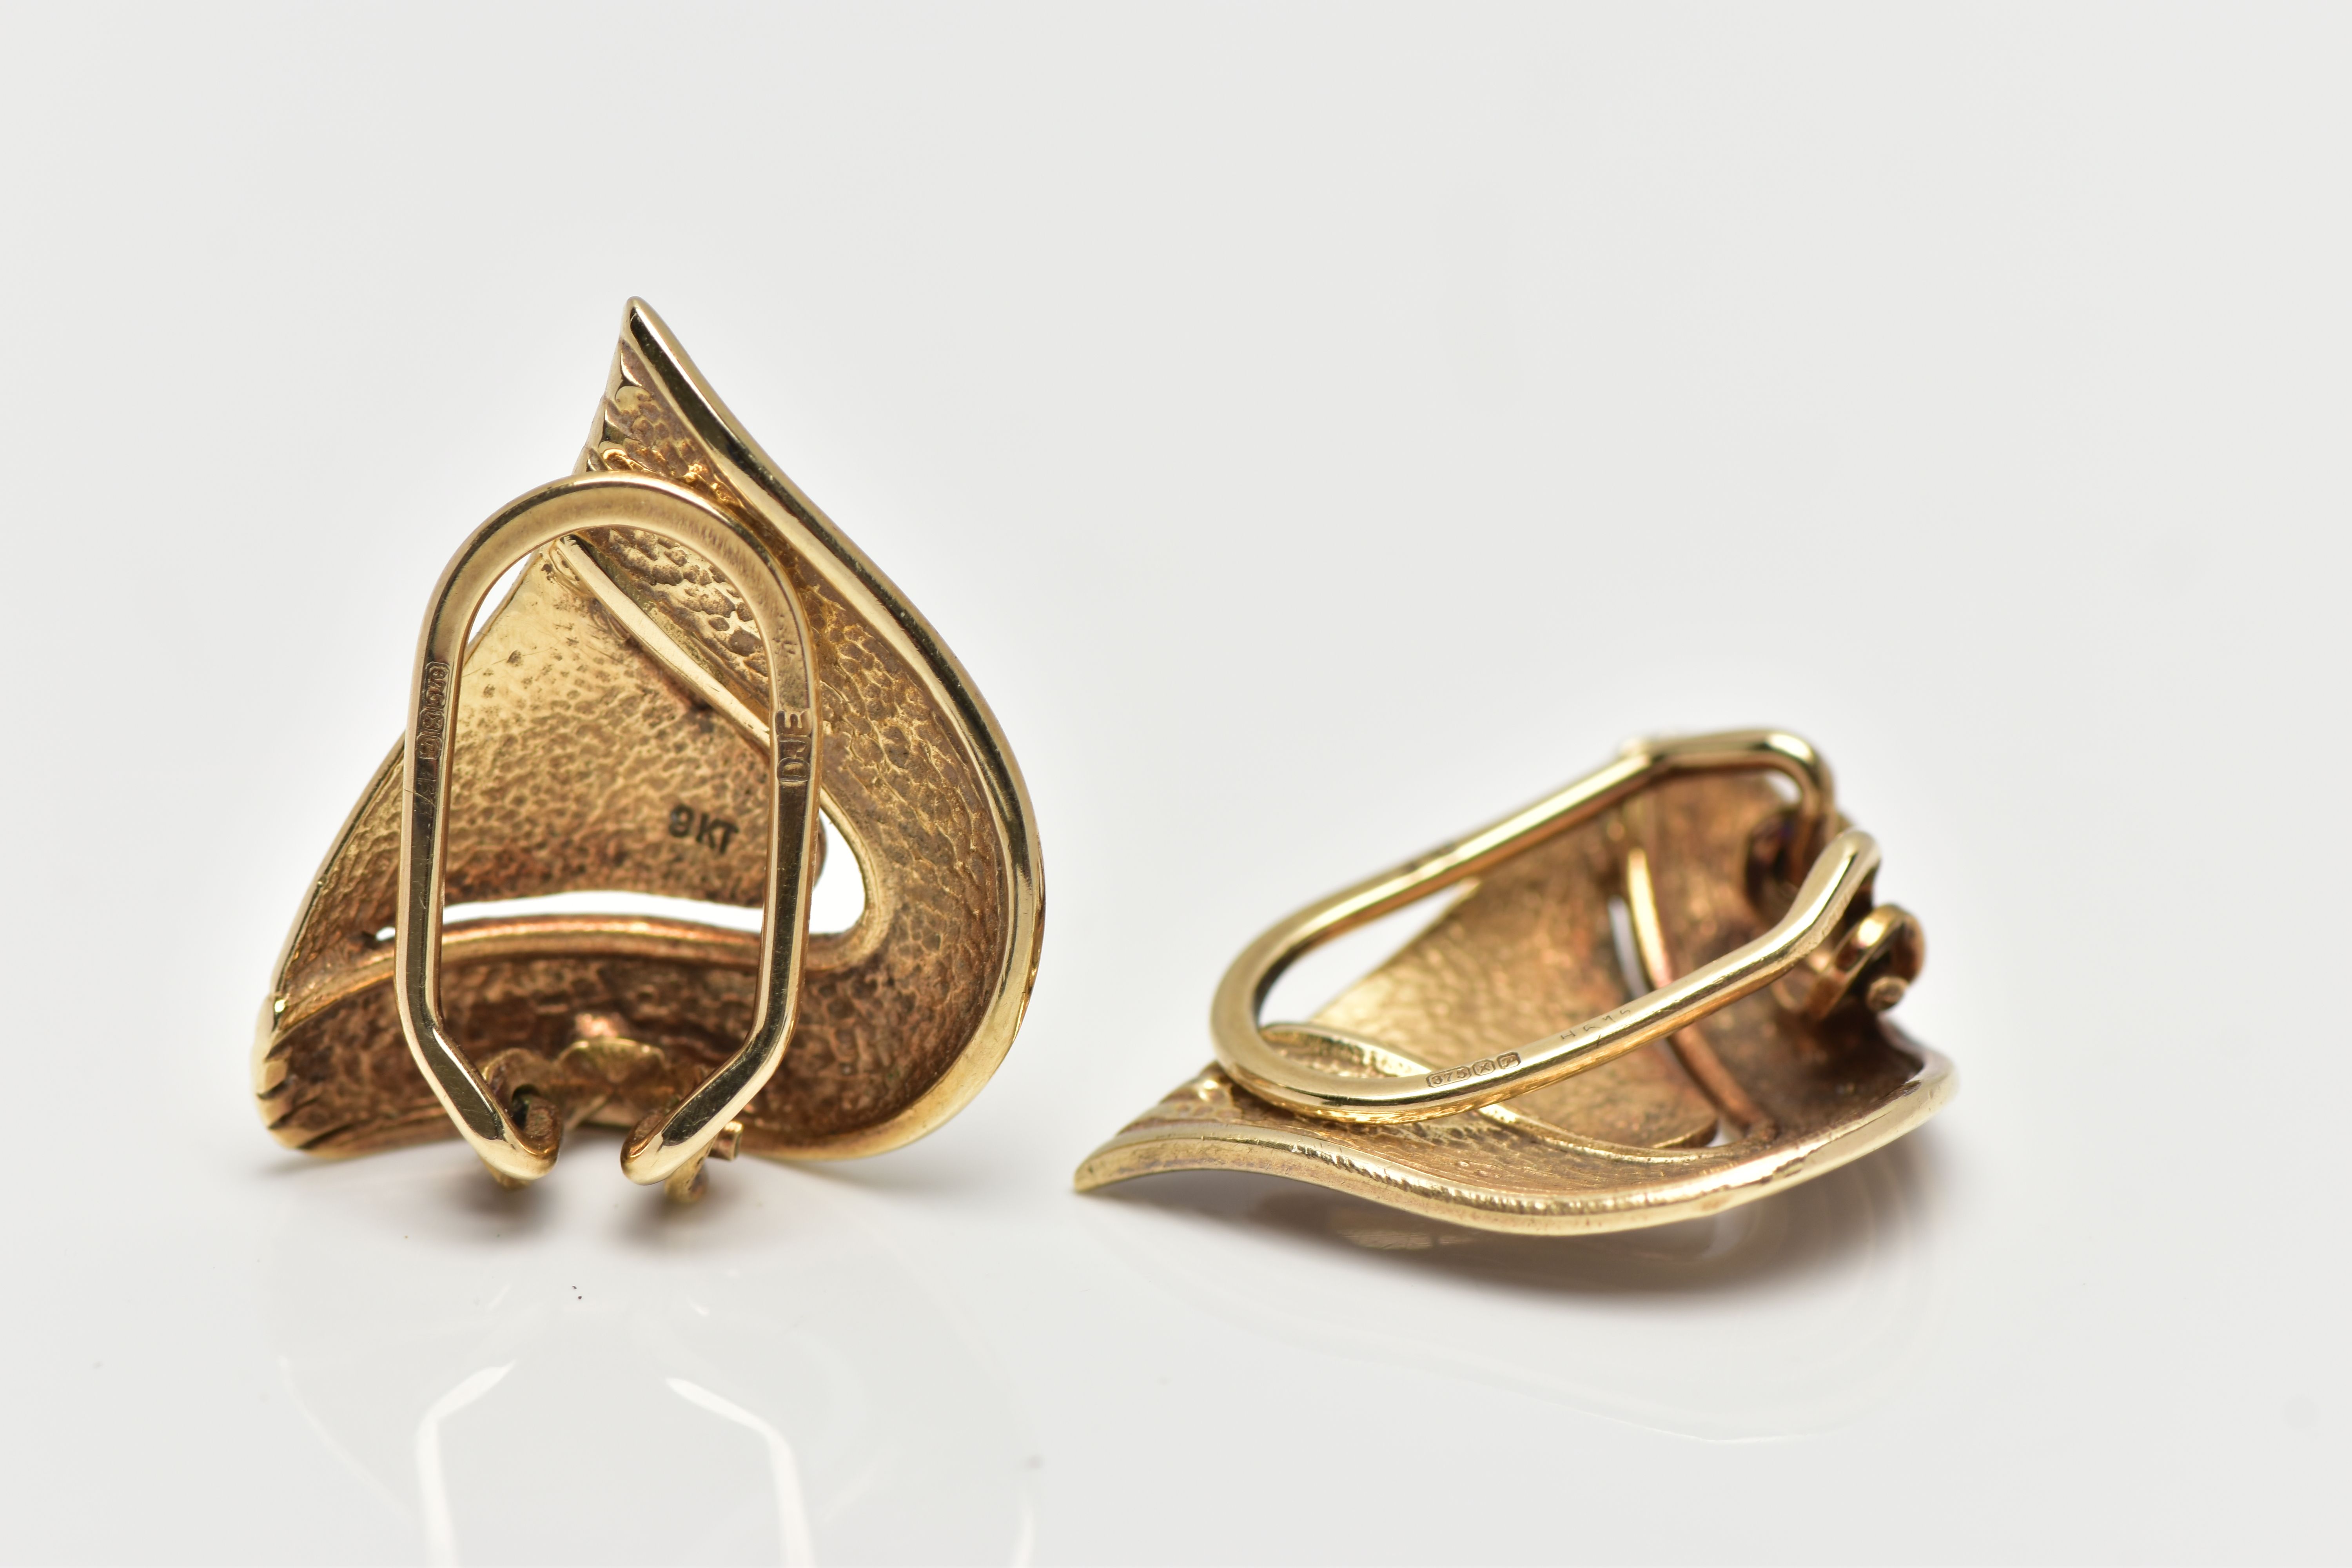 A PAIR OF 9CT GOLD EARRINGS, yellow gold clip on earrings, abstract design with grooved surround, - Image 3 of 4